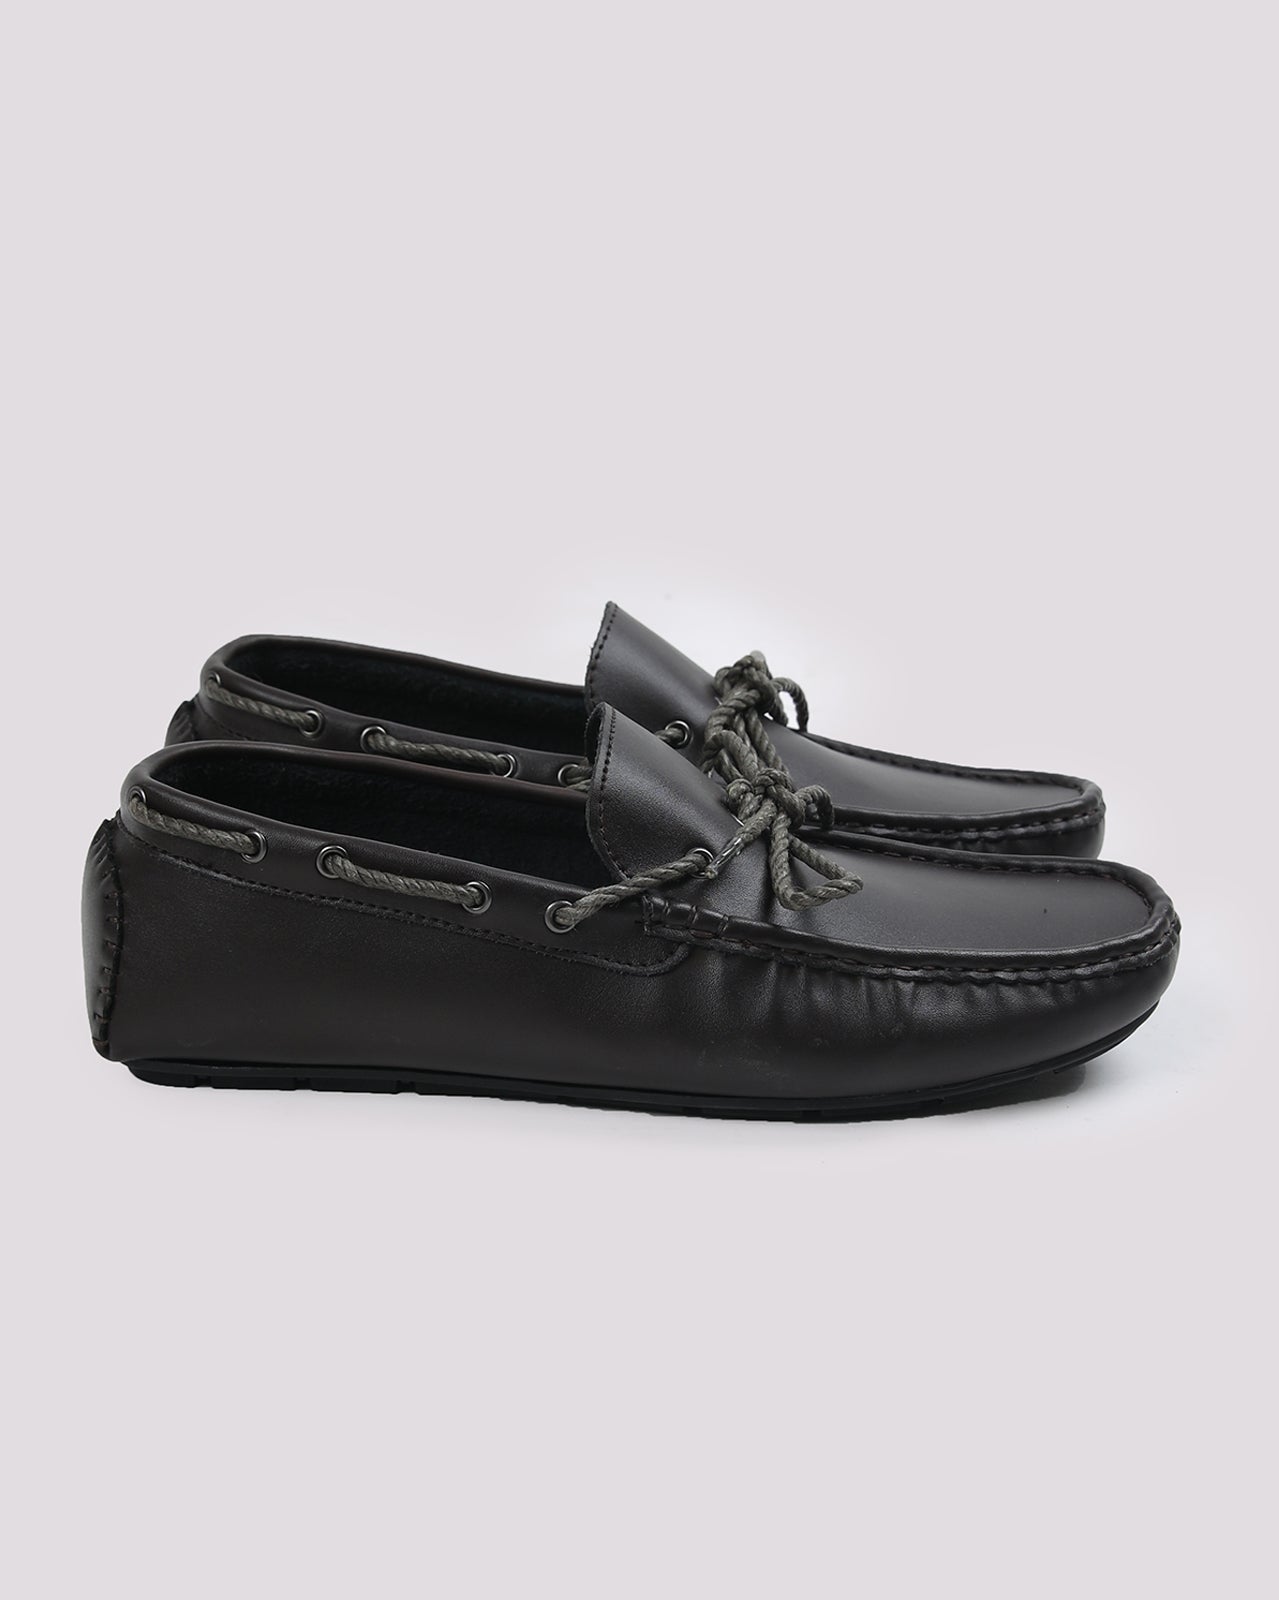 Brown Classic Loafer Shoes